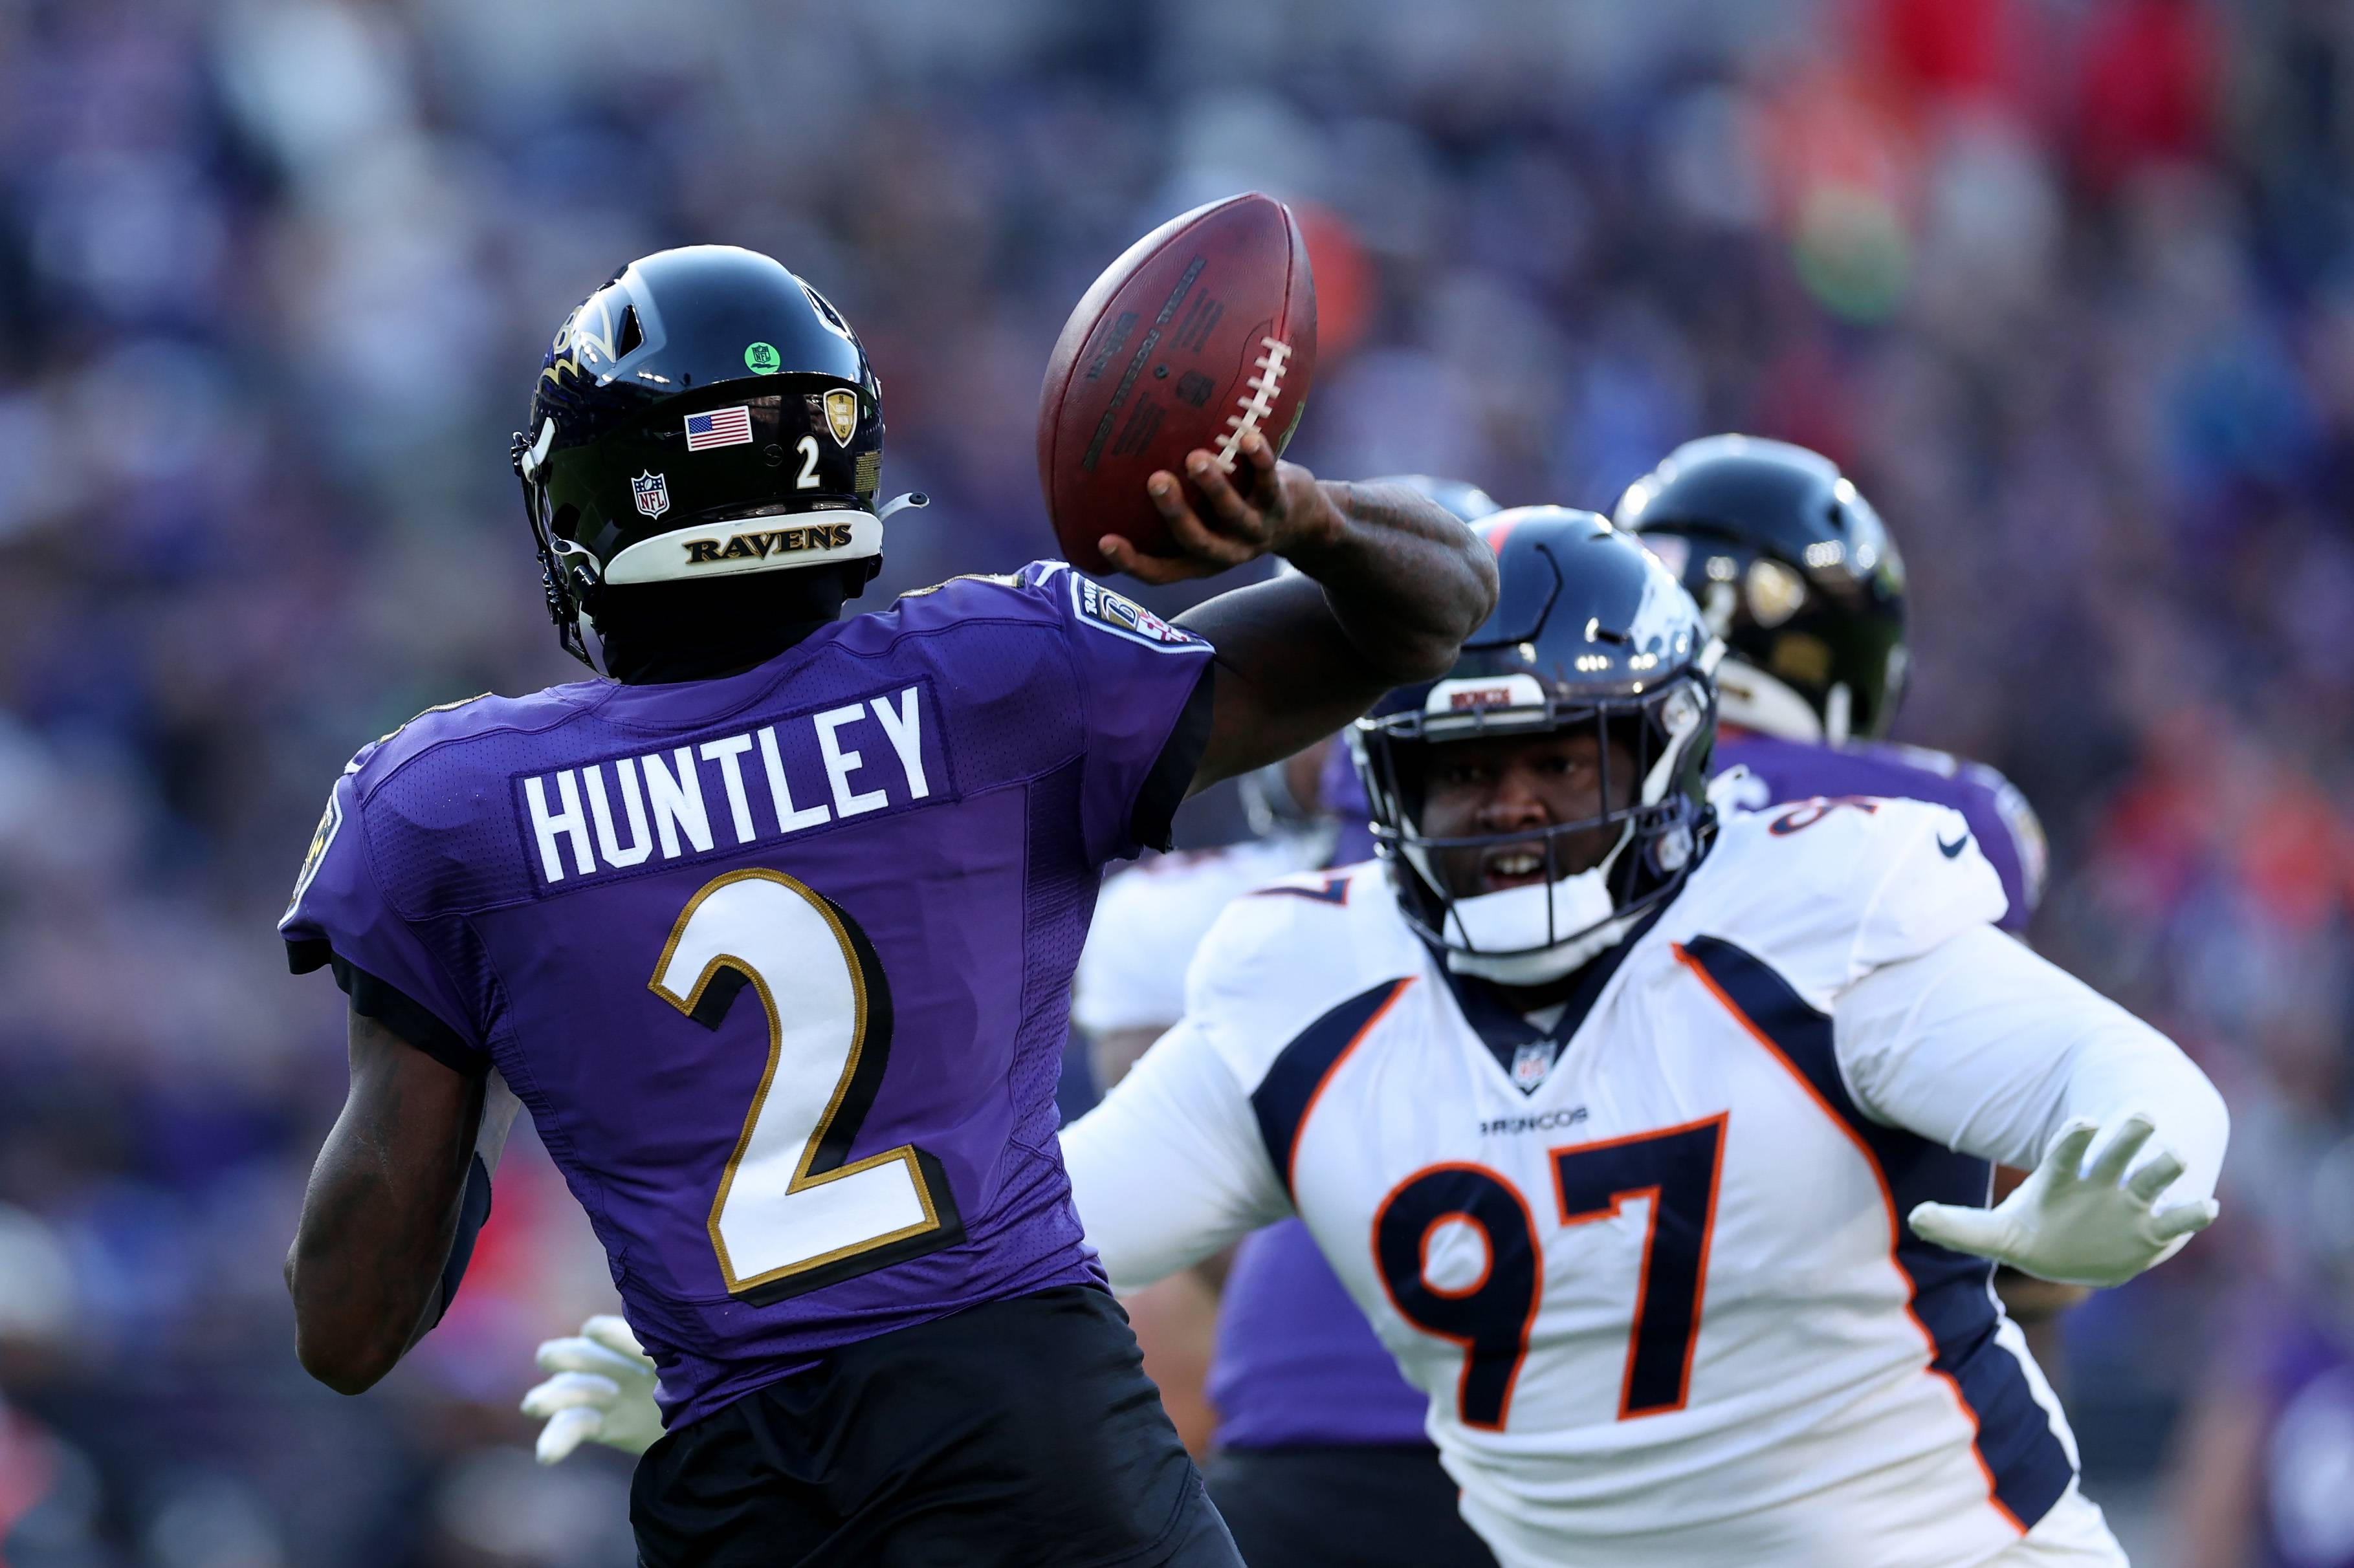 BALTIMORE, MARYLAND - DECEMBER 04: Quarterback Tyler Huntley #2 of the Baltimore Ravens throws a second half pass against the Denver Broncos at M&T Bank Stadium on December 04, 2022 in Baltimore, Maryland.